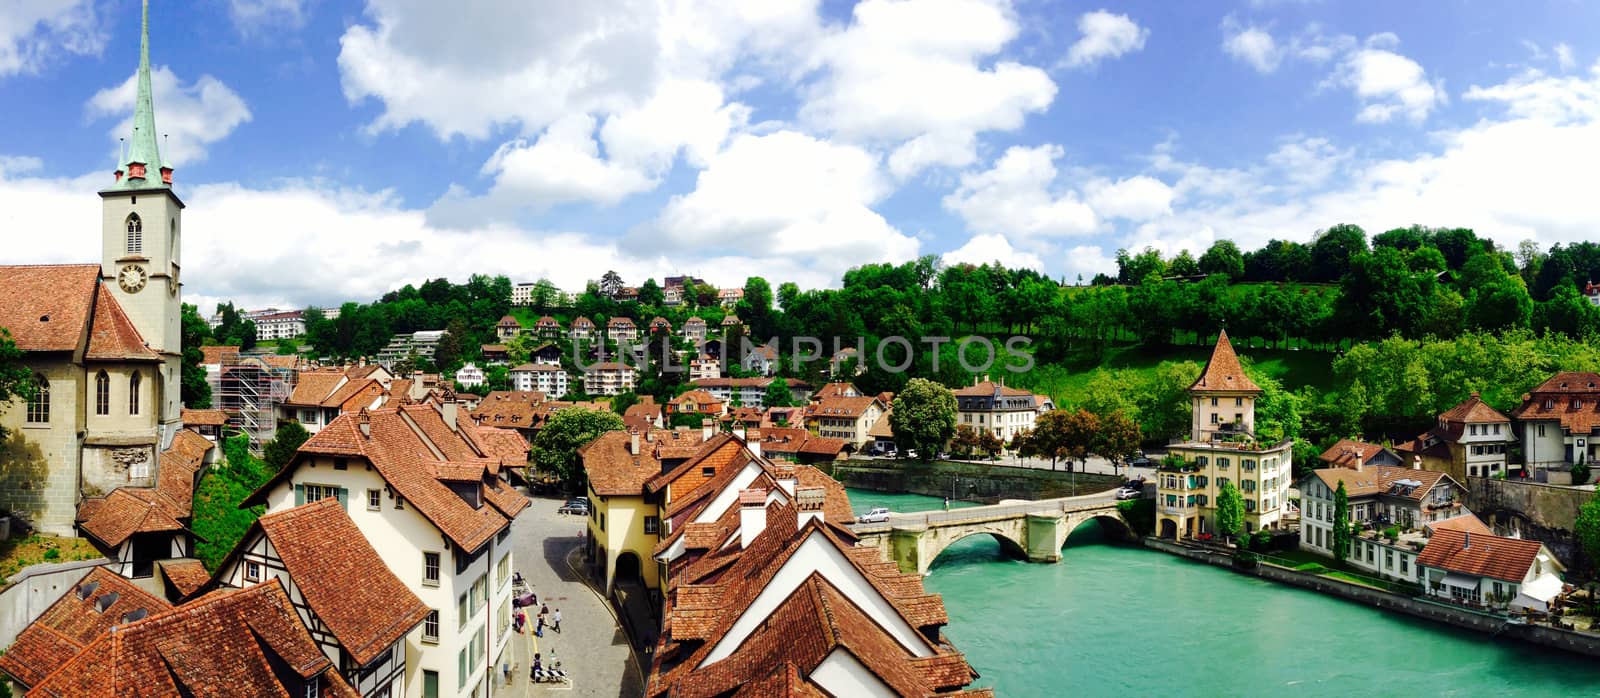 panorama of historical old town city and river on bridge in Bern, Switzerland